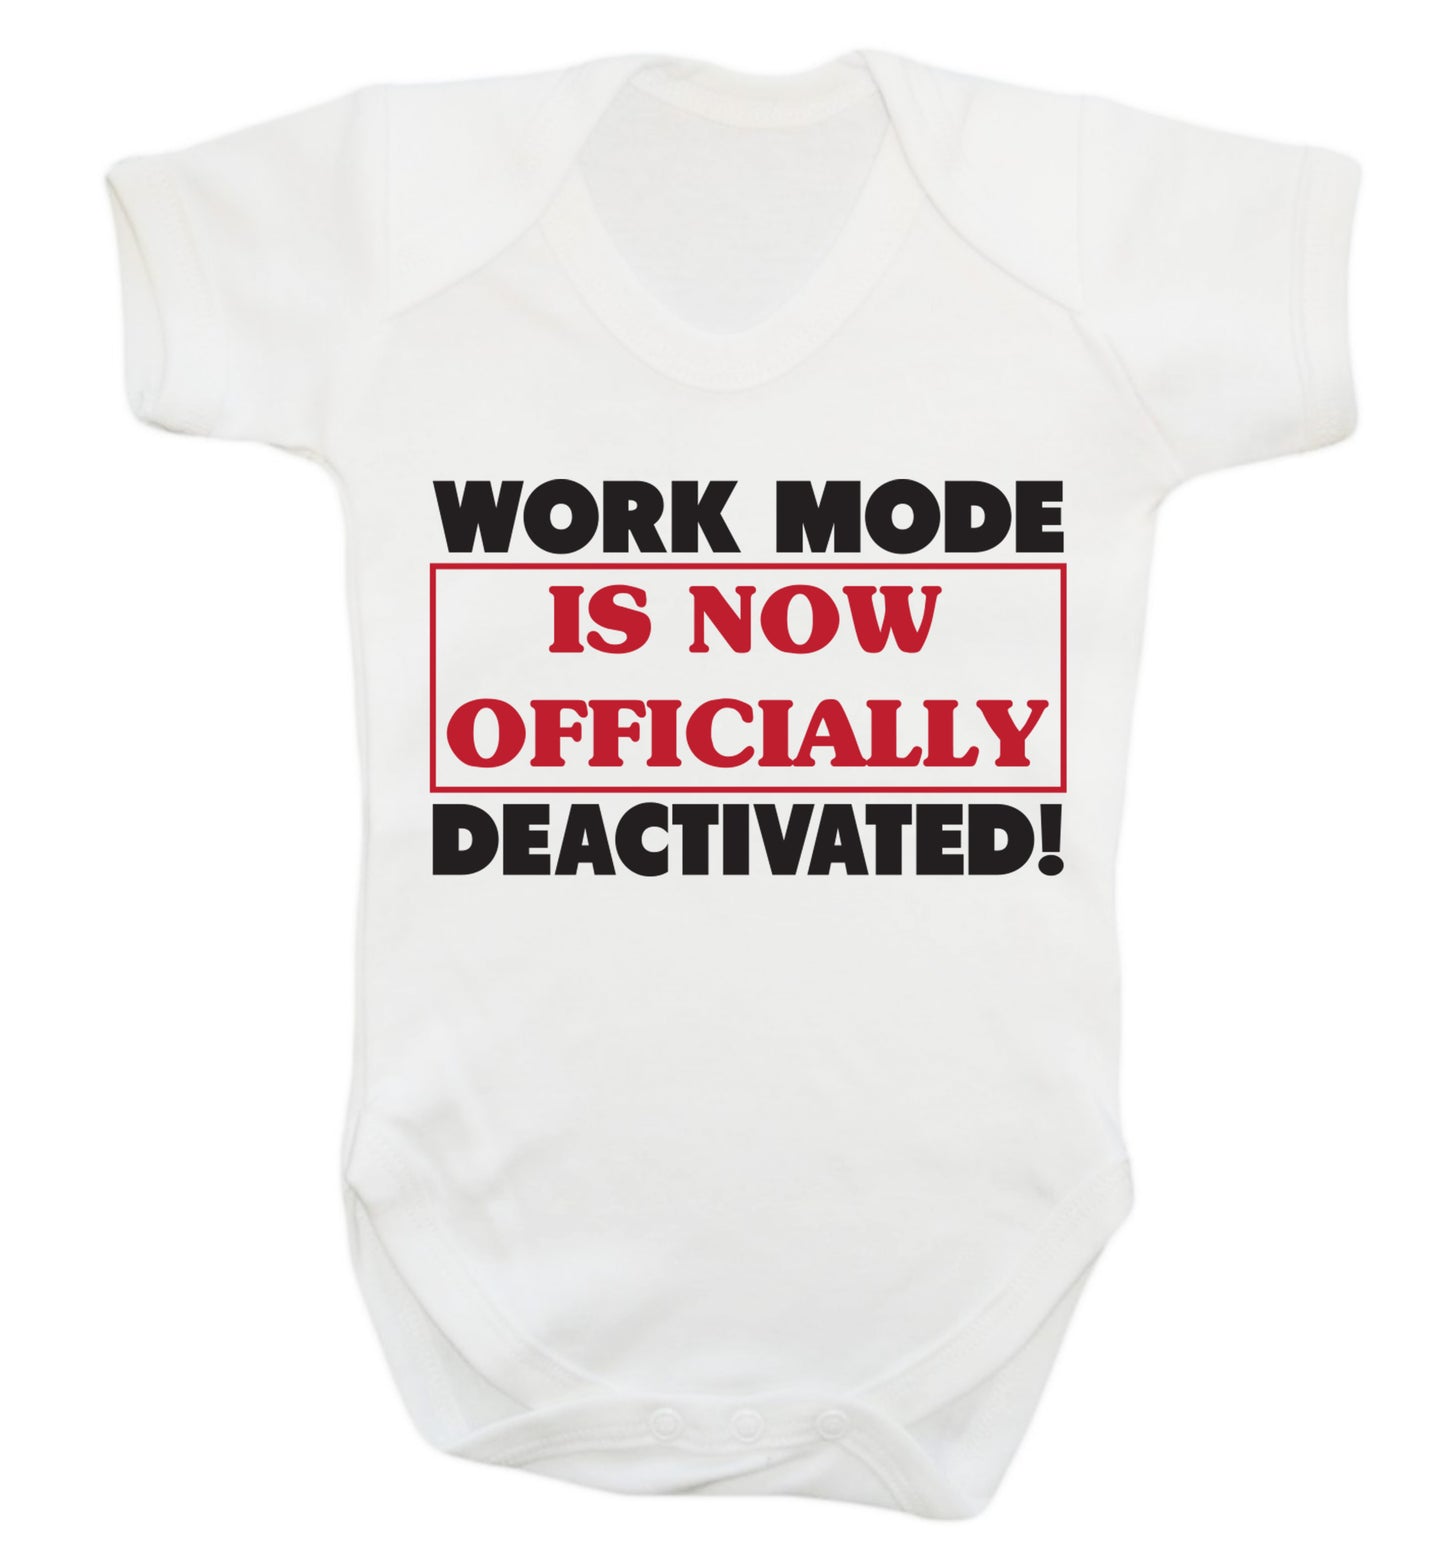 Work mode is now officially deactivated Baby Vest white 18-24 months